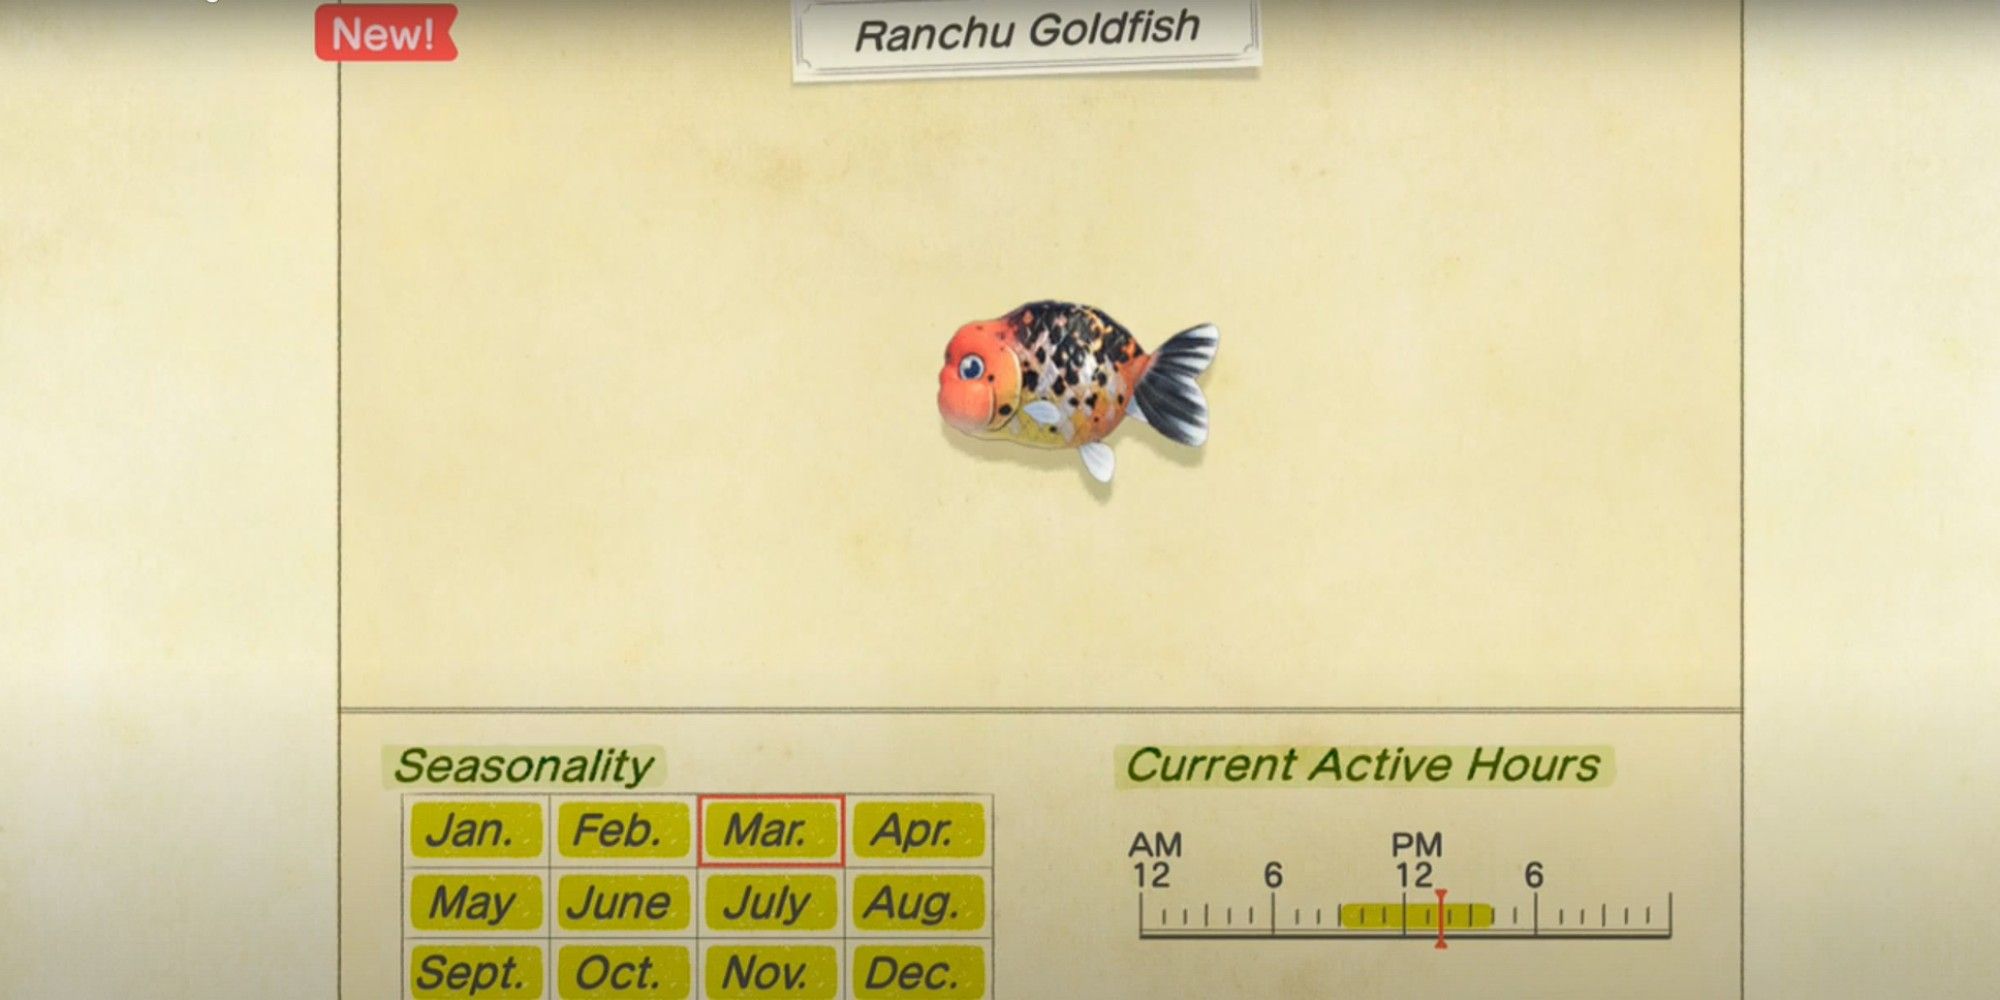 The Critterpedia Entry for the Ranchu Goldfish in Animal Crossing: New Horizons